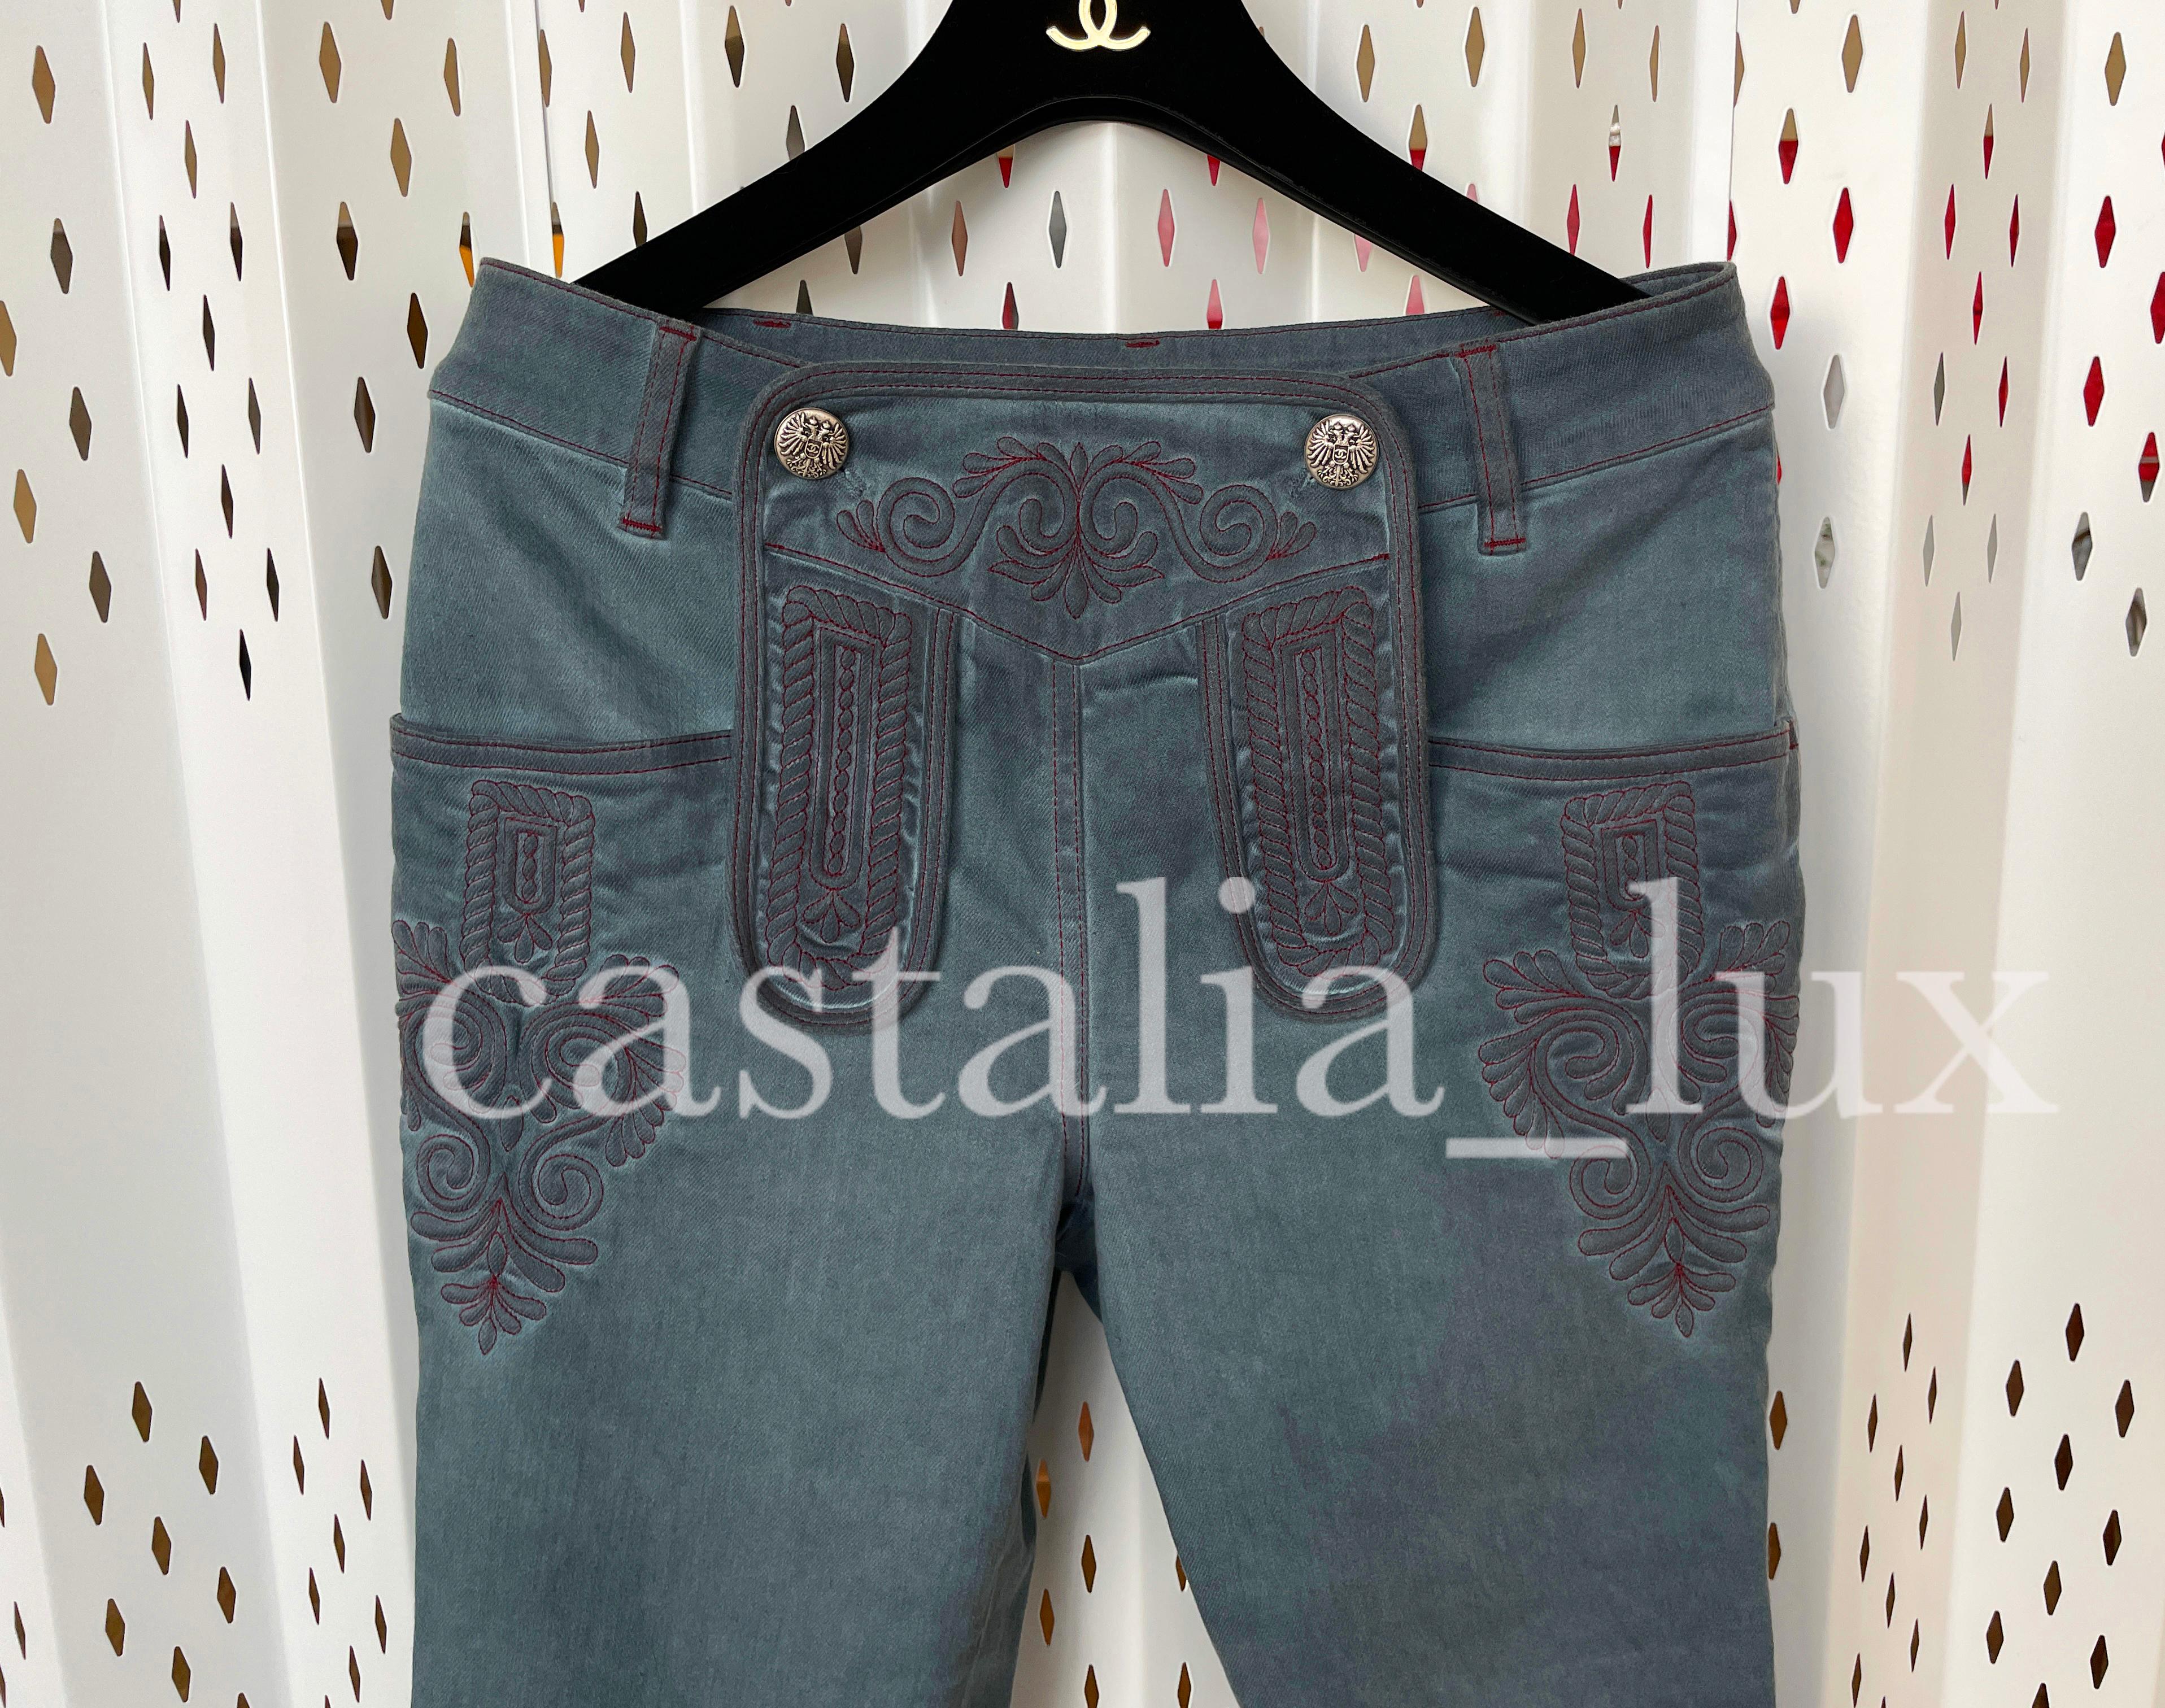 Chanel Cara Delevingne Style New CC Buttons Jeans For Sale 3